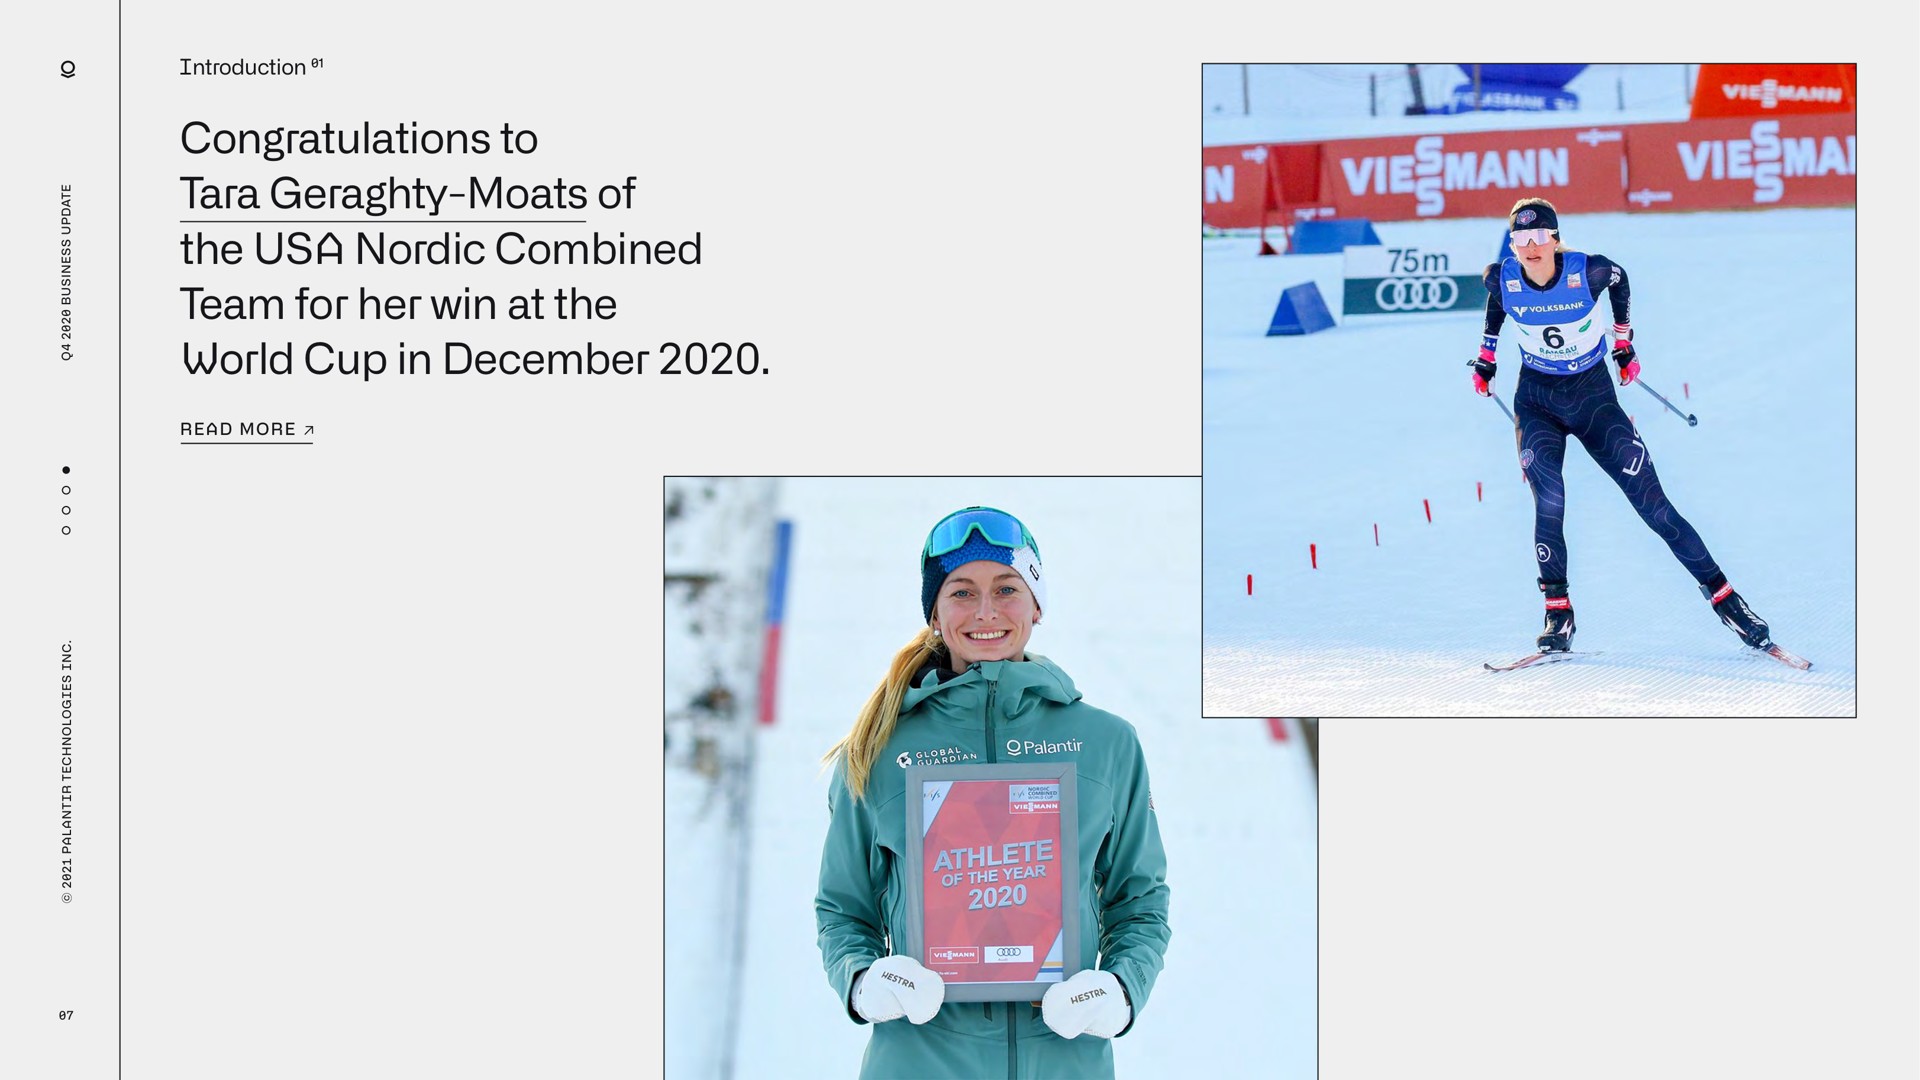 congratulations to tara moats of the combined team for her win at the world cup in eta | Palantir